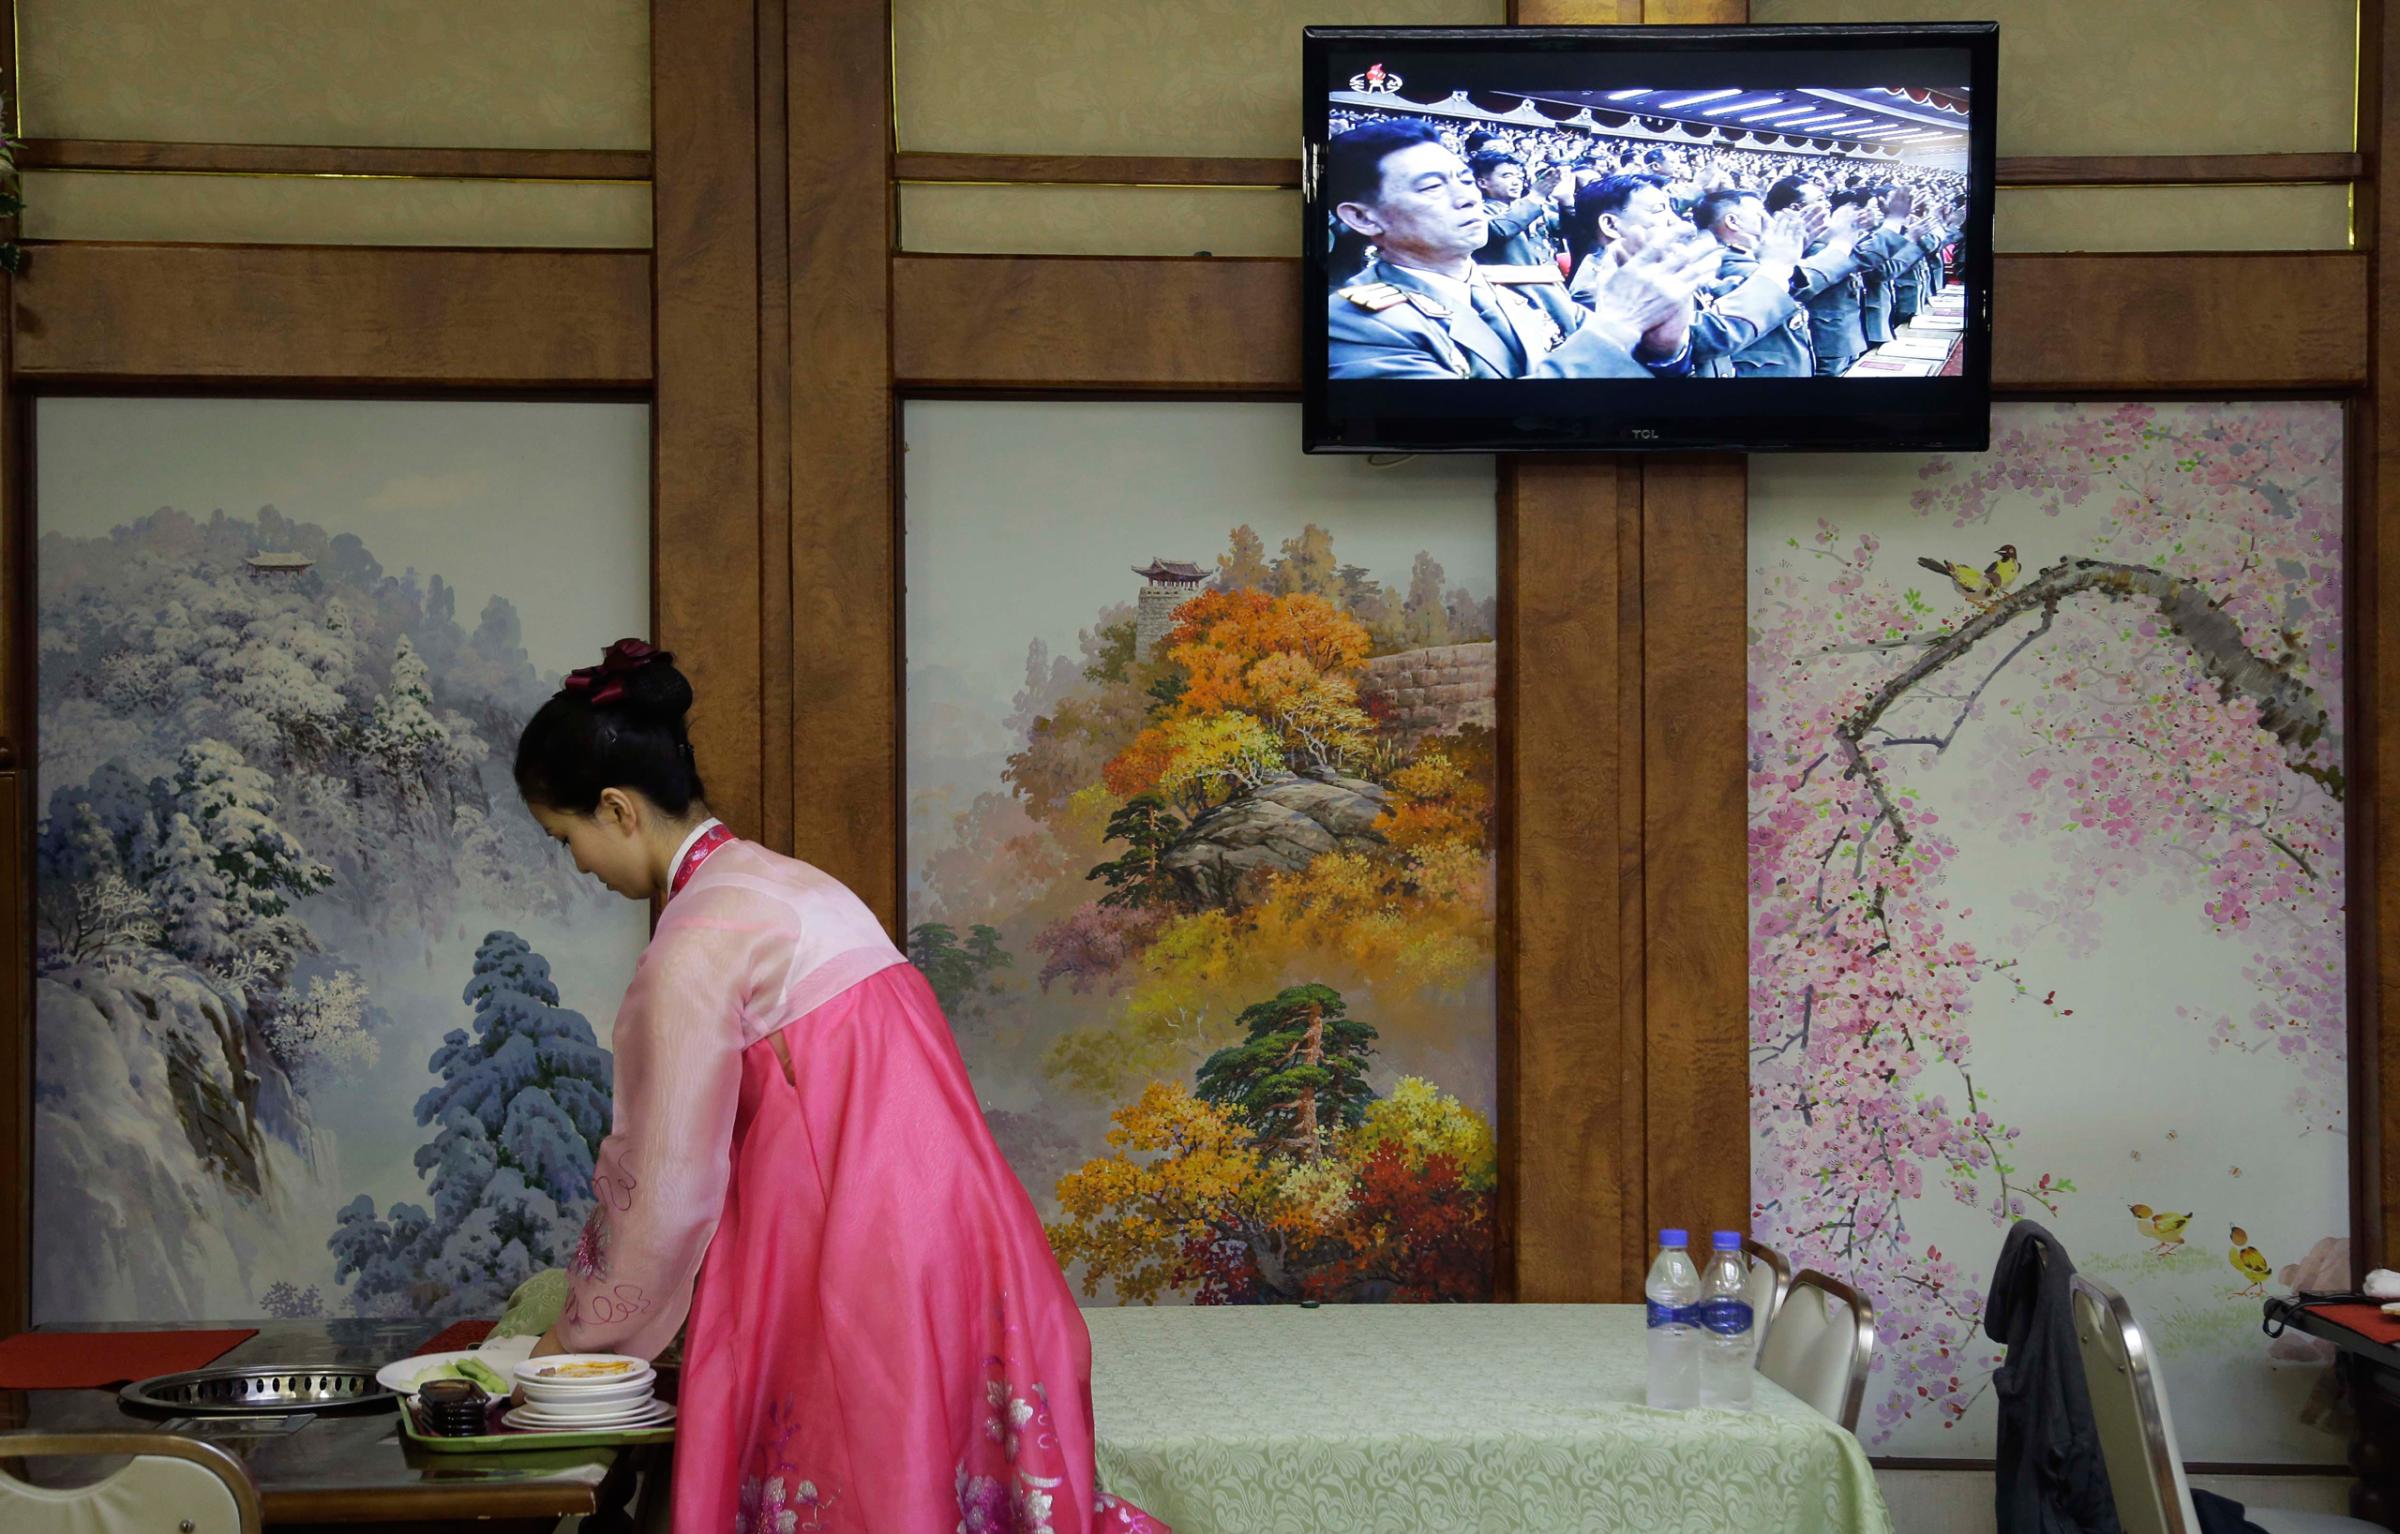 A waitress clears a table while a broadcast of the second day of the 7th Congress of the Workers' Party of Korea is shown on local television on Saturday, May 7, 2016, in Pyongyang, North Korea. North Korea's ruling party is preparing to bestow its top title on leader Kim Jong Un, another clear sign that the third heir to North Korea's dynasty of Kims is firmly in control despite his country's deepening international isolation over one of his key ambitions, to keep developing more and better nuclear weapons. (AP Photo/Wong Maye-E)